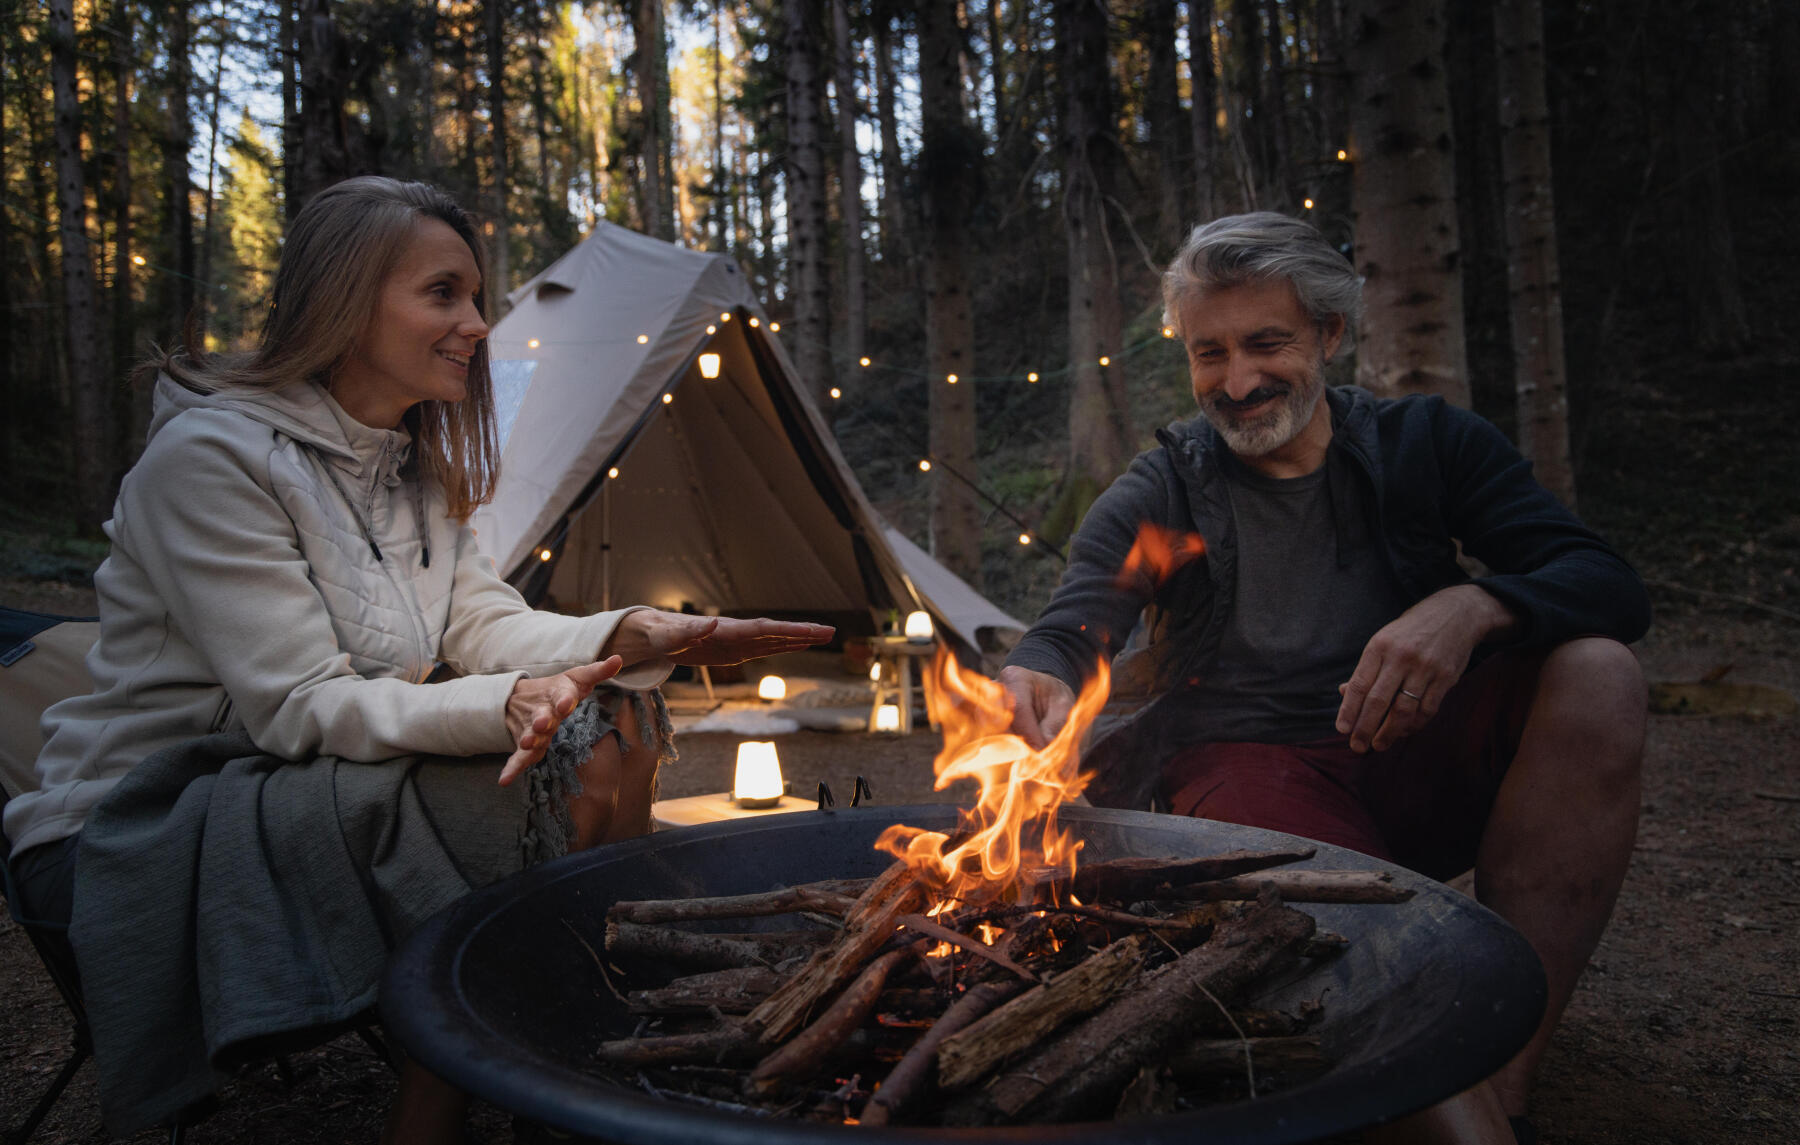 What is glamping - camping and hotel vacation combined